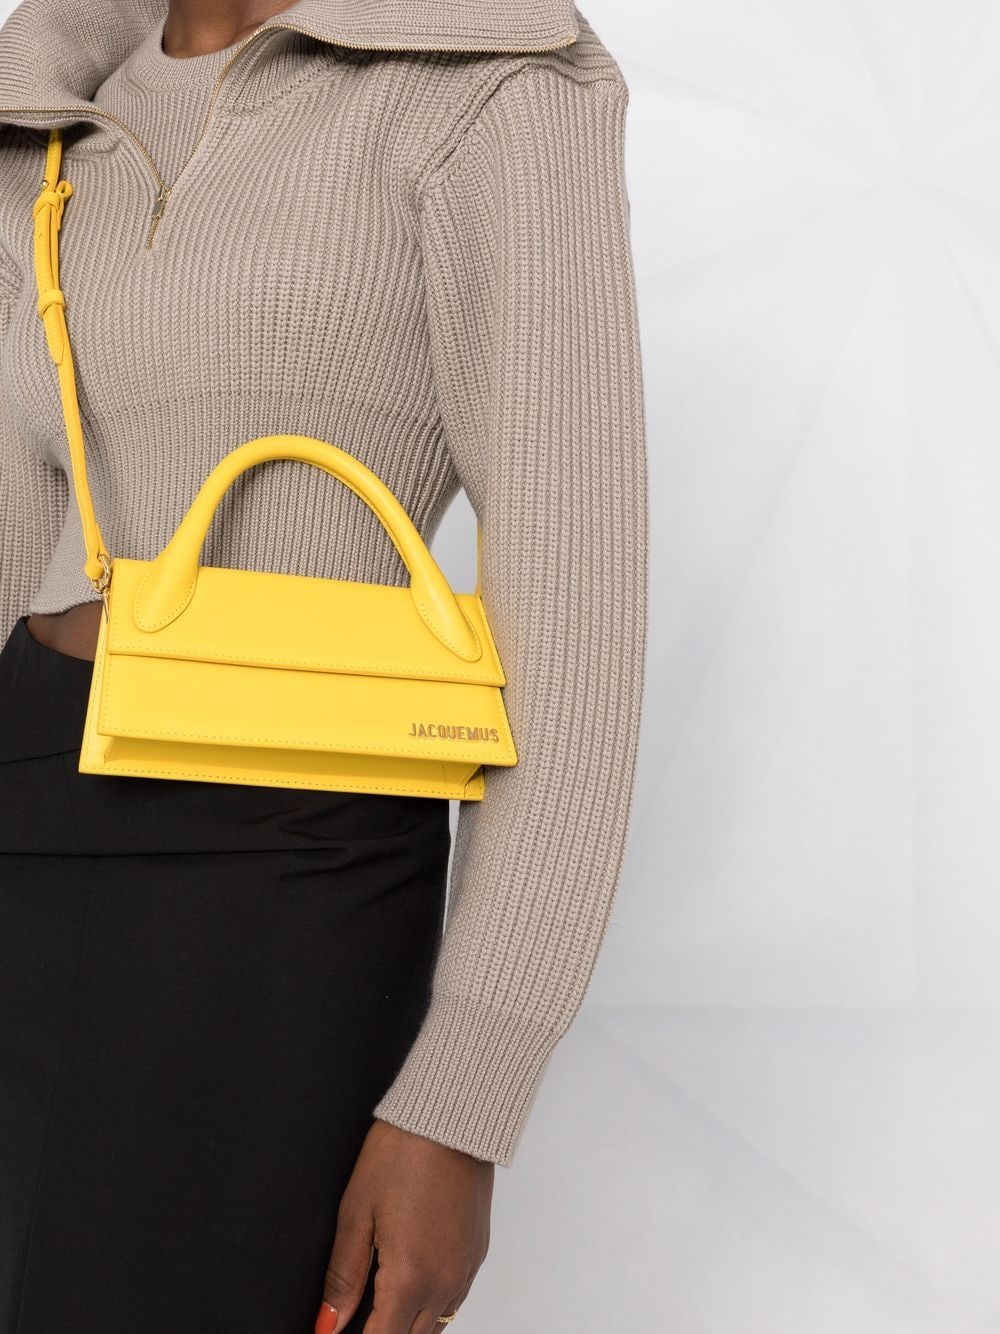 Le Chiquito Long Leather Tote in Yellow - Jacquemus